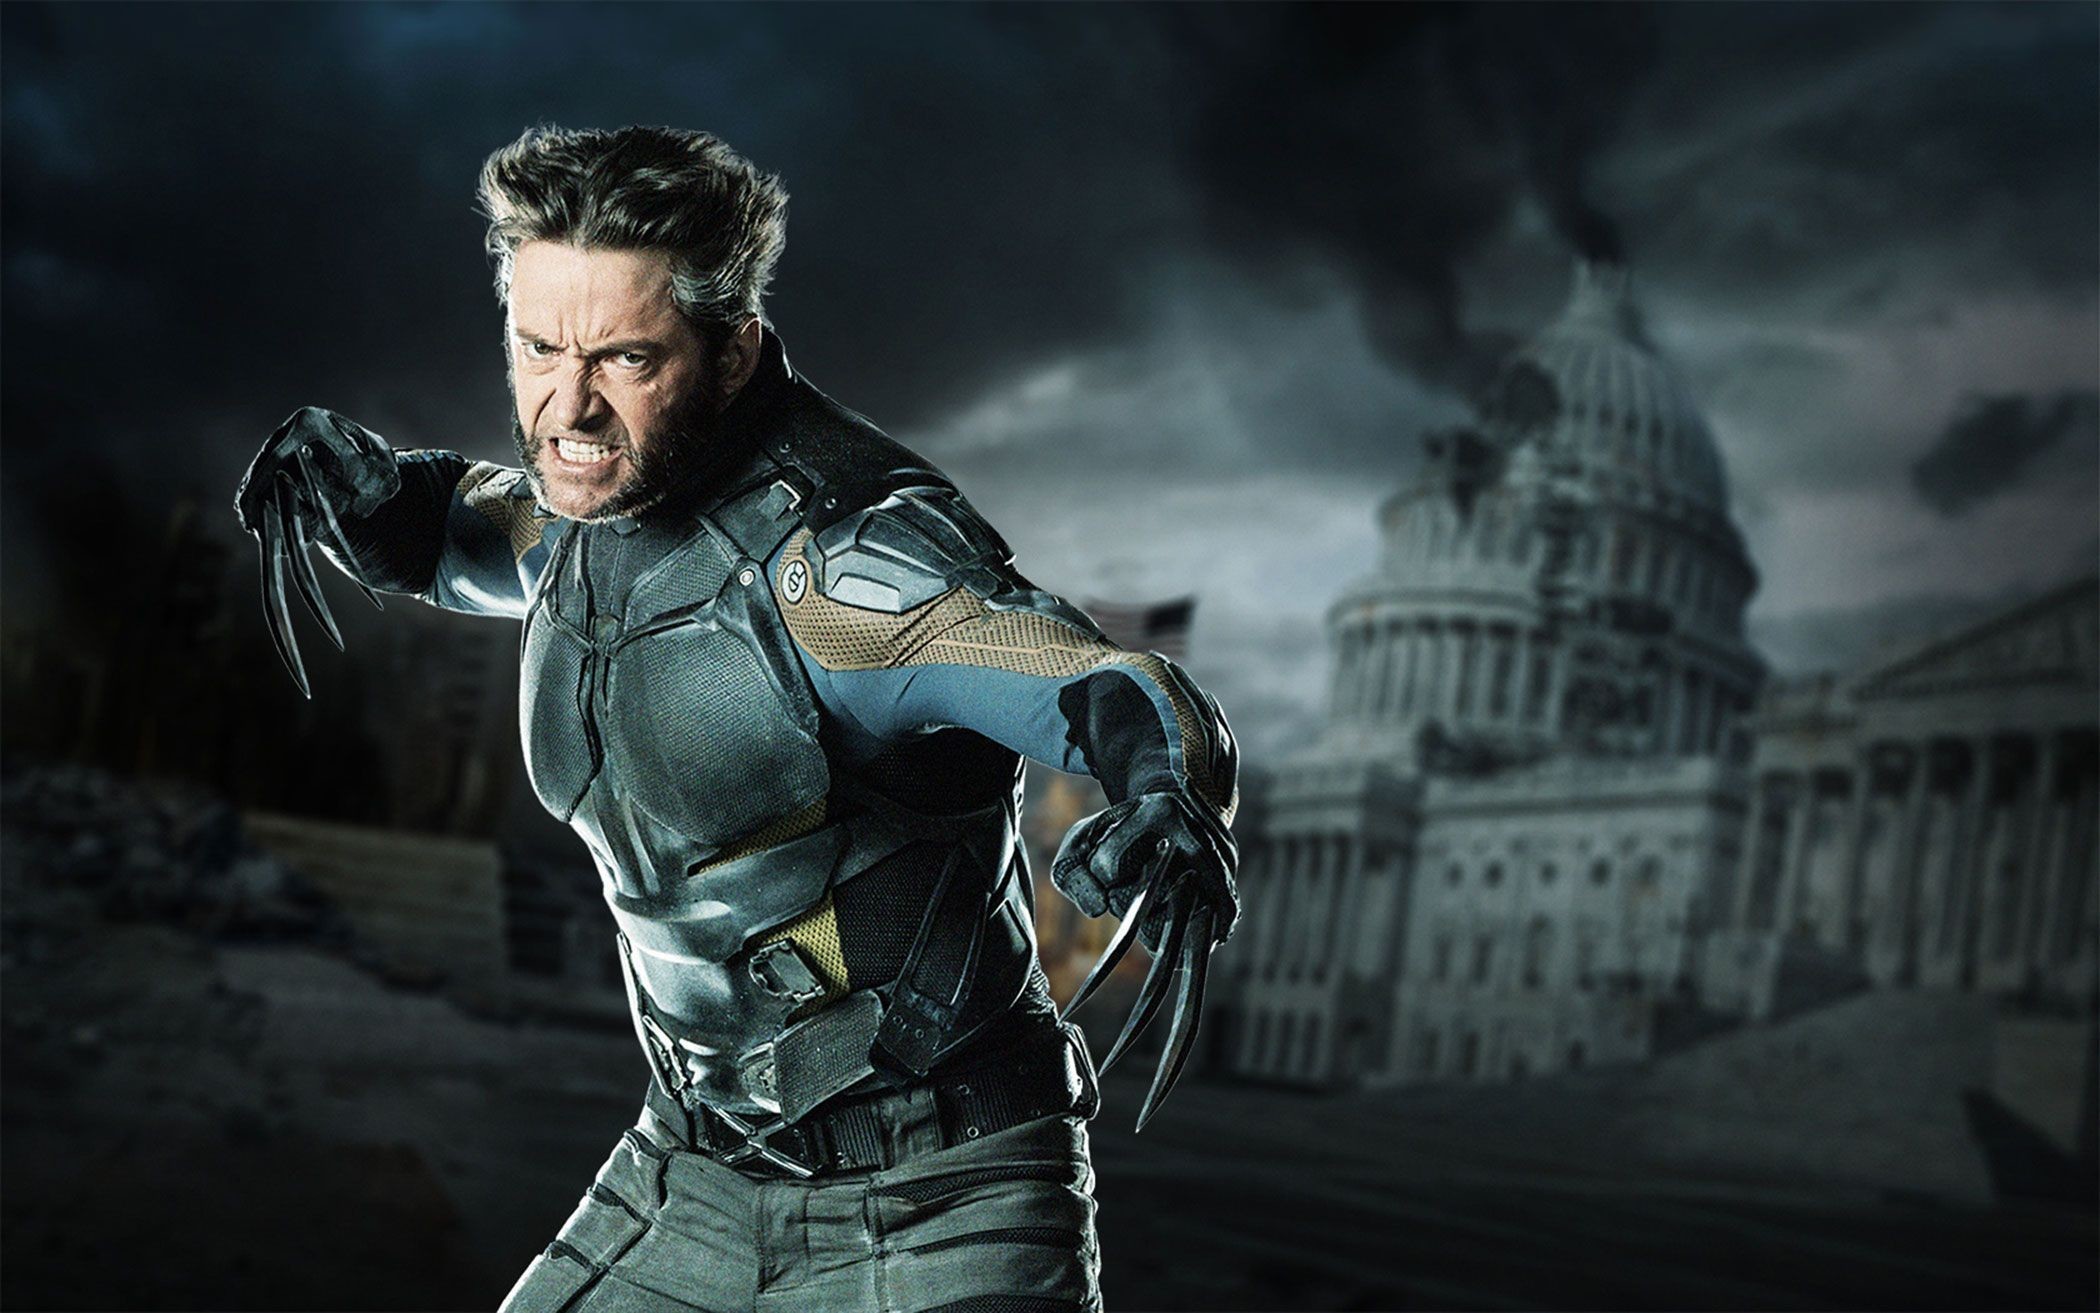 marvel hd wallpapers free download,action adventure game,fictional character,movie,superhero,digital compositing